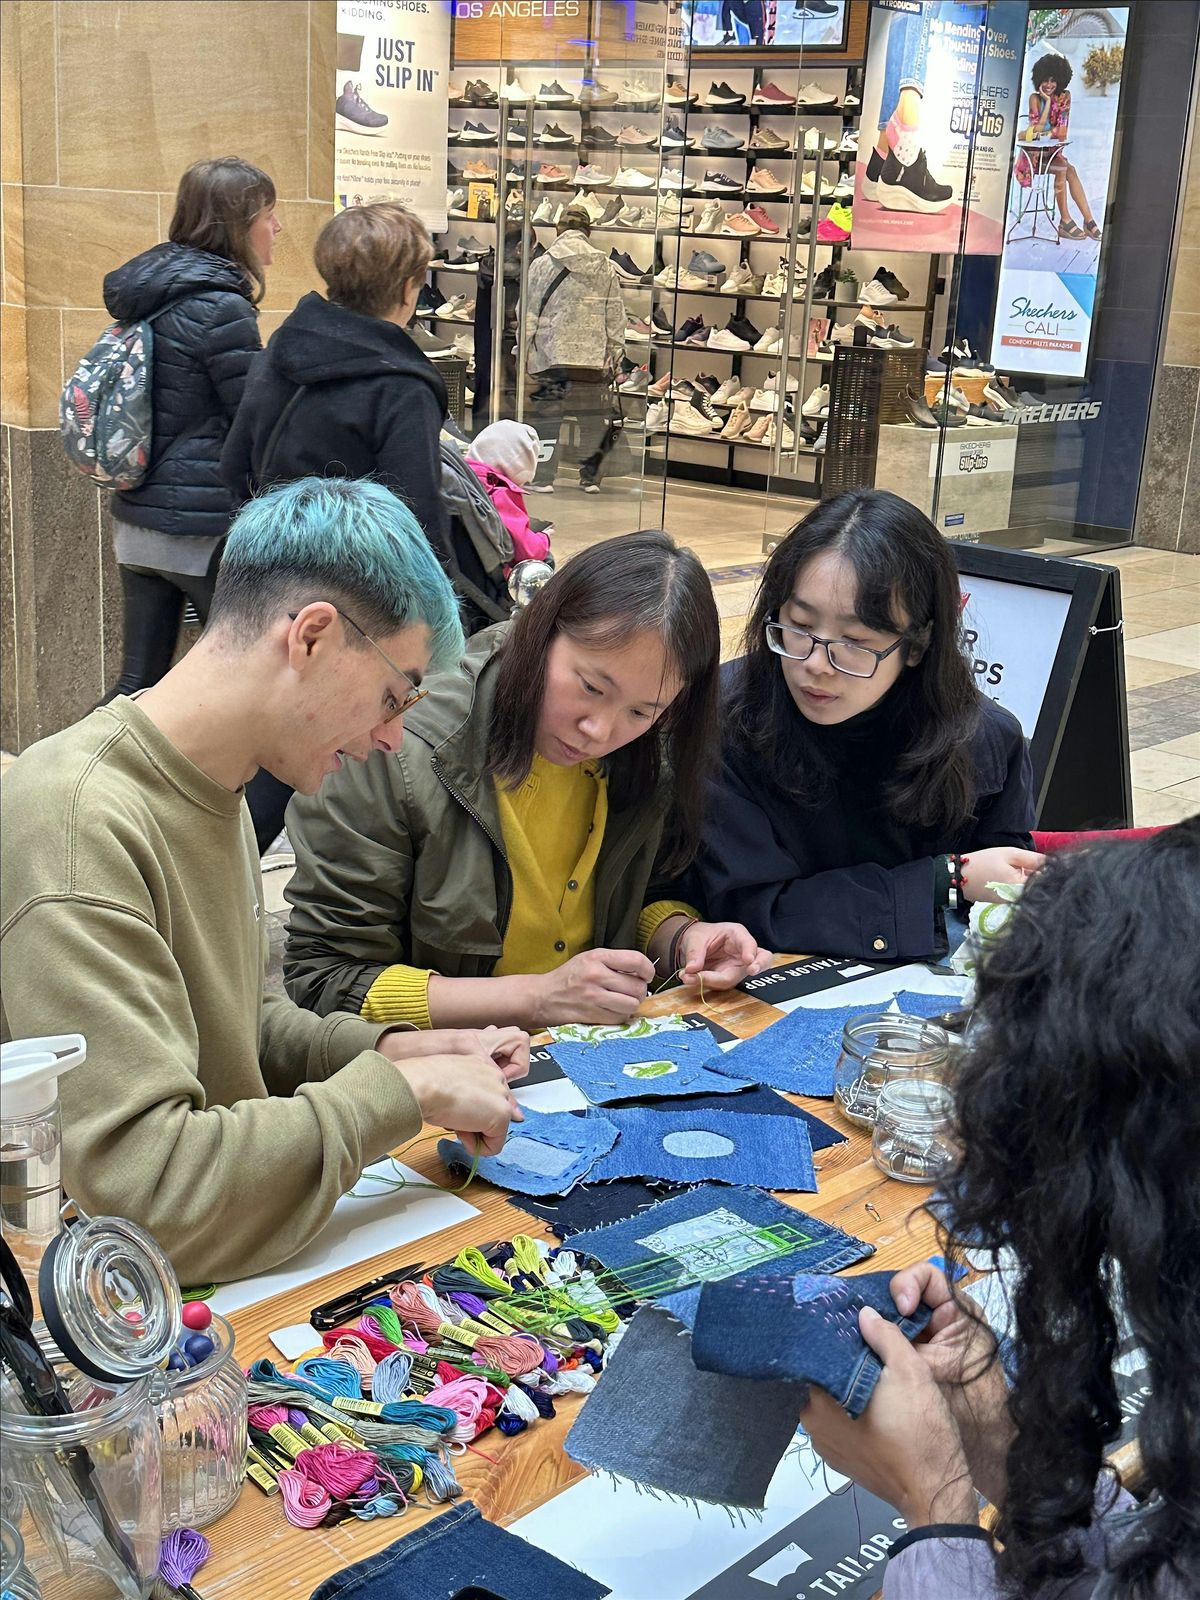 How to Mend with Care: Hand Repair Workshop for Clothes